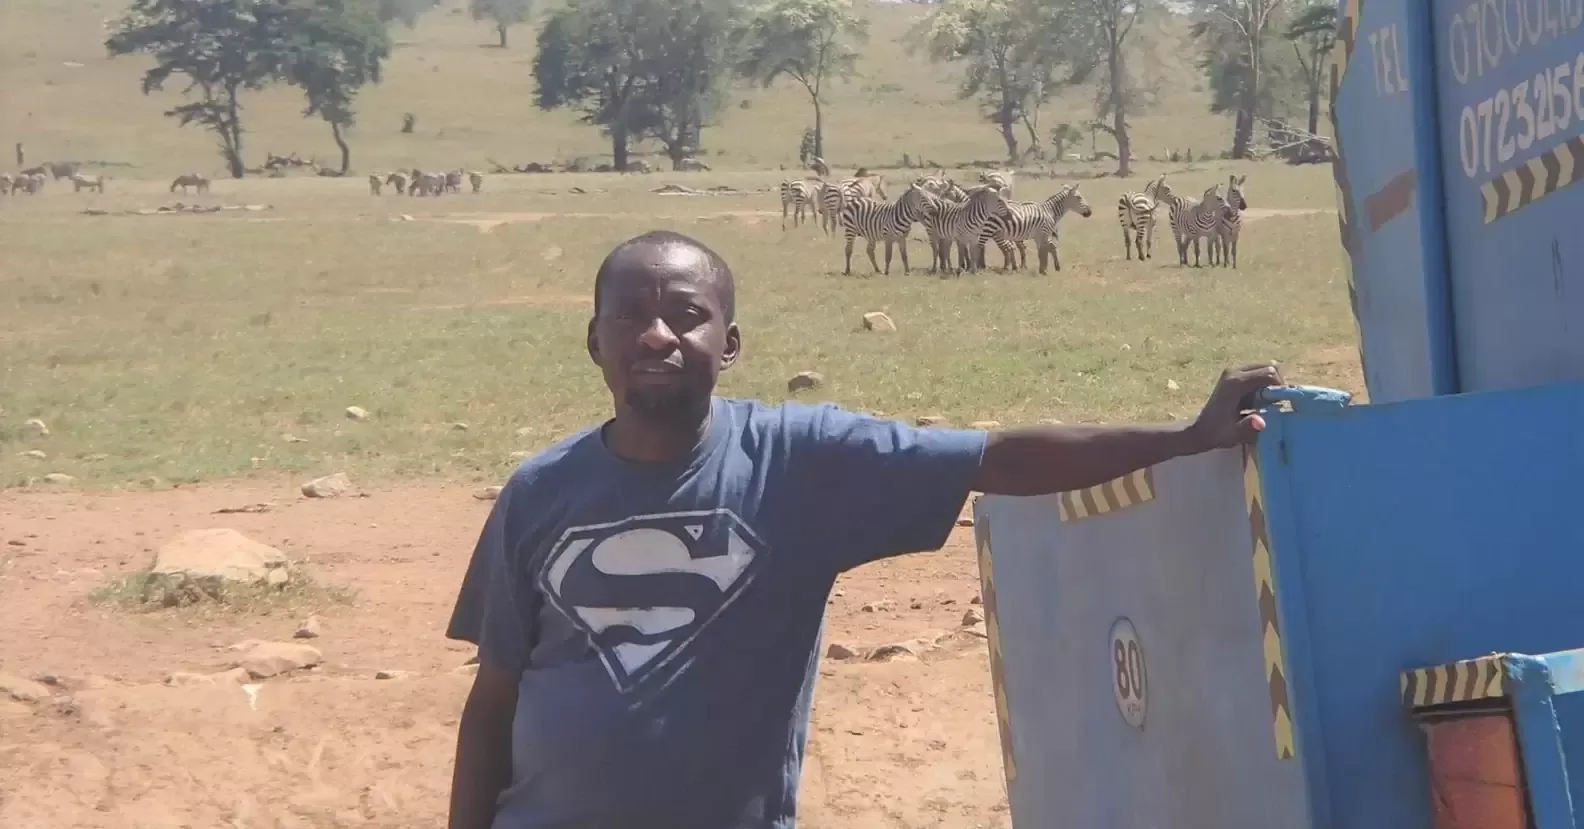 A man travels for hours daily through a drought to provide water for wild animals 11